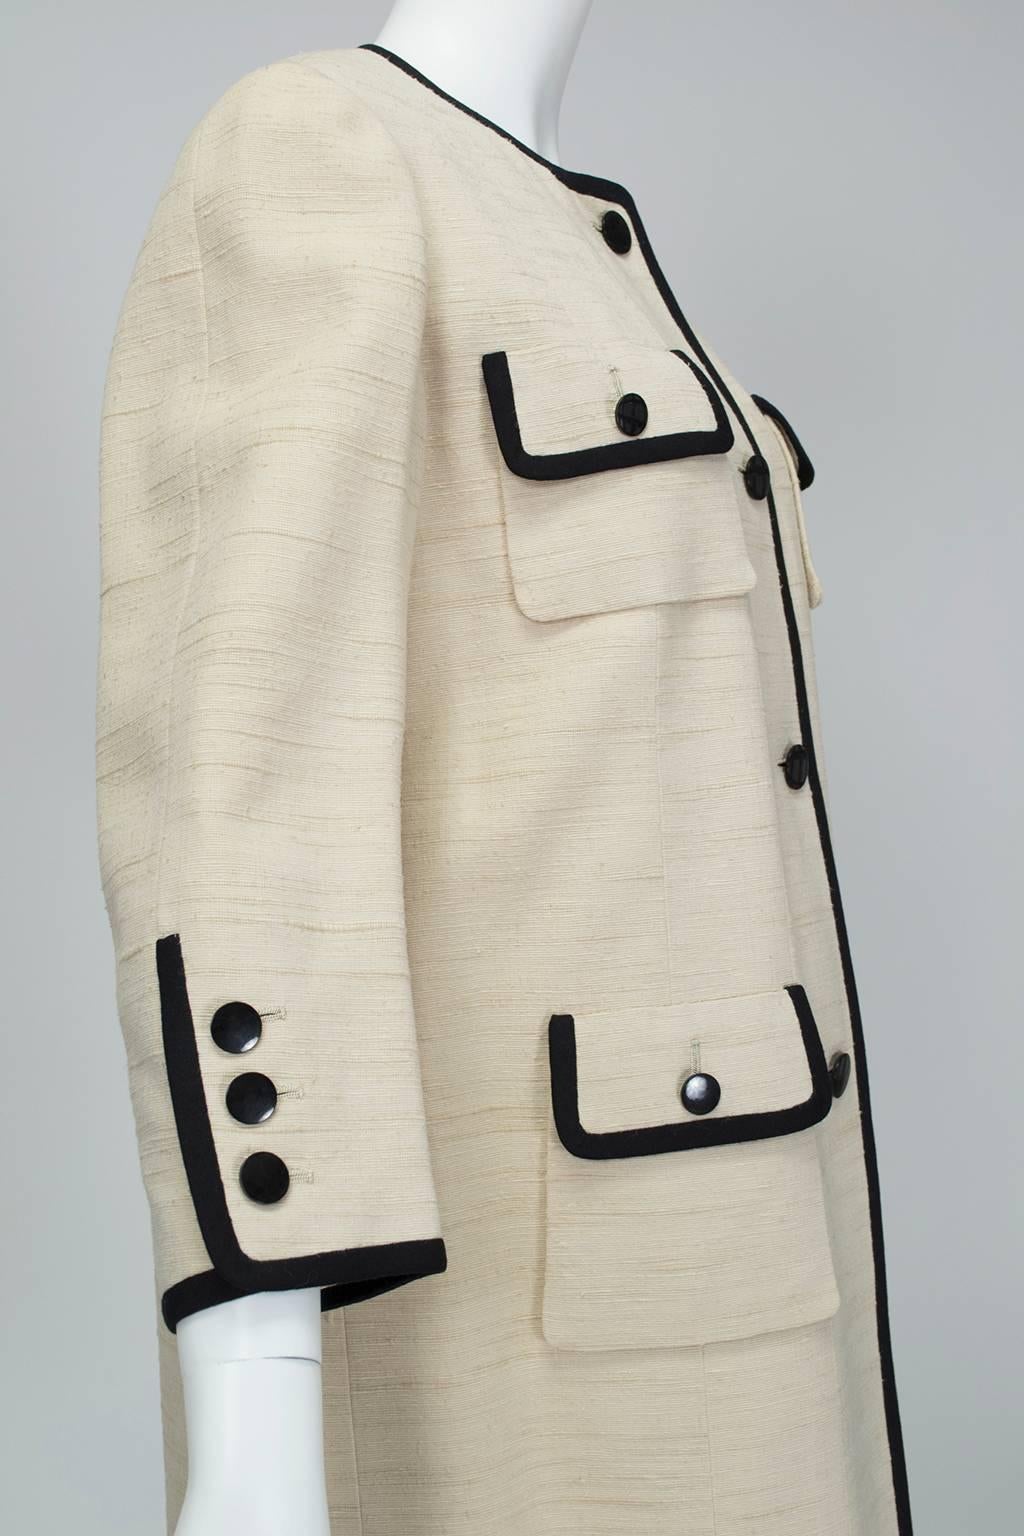 Women's Traina-Norell Mod Ivory ¾ Coat with Contrast Piping - Medium, 1950s For Sale